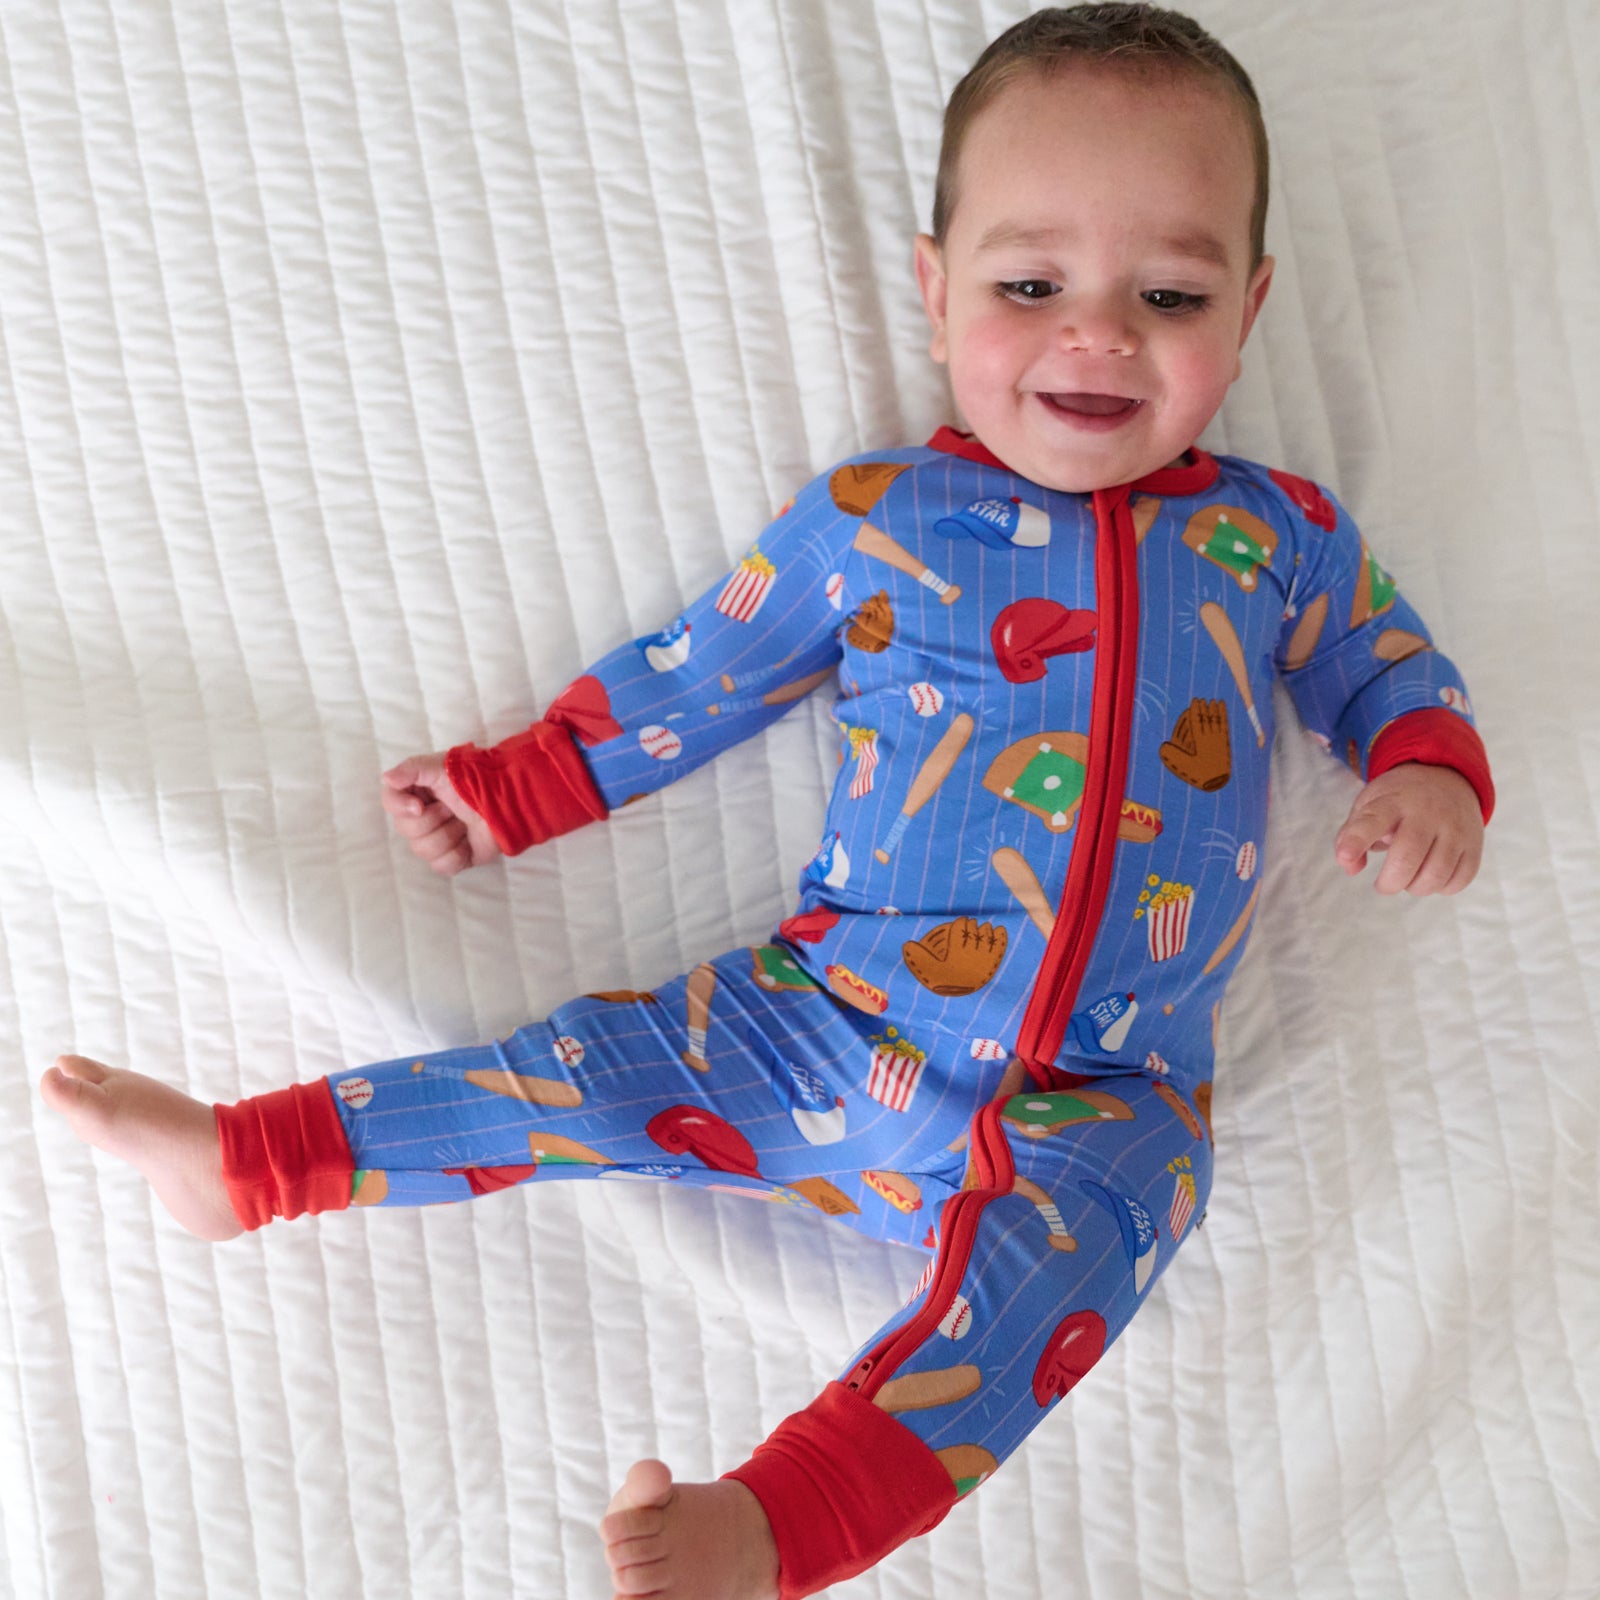 Child laying on a bed wearing a Blue All Stars zippy